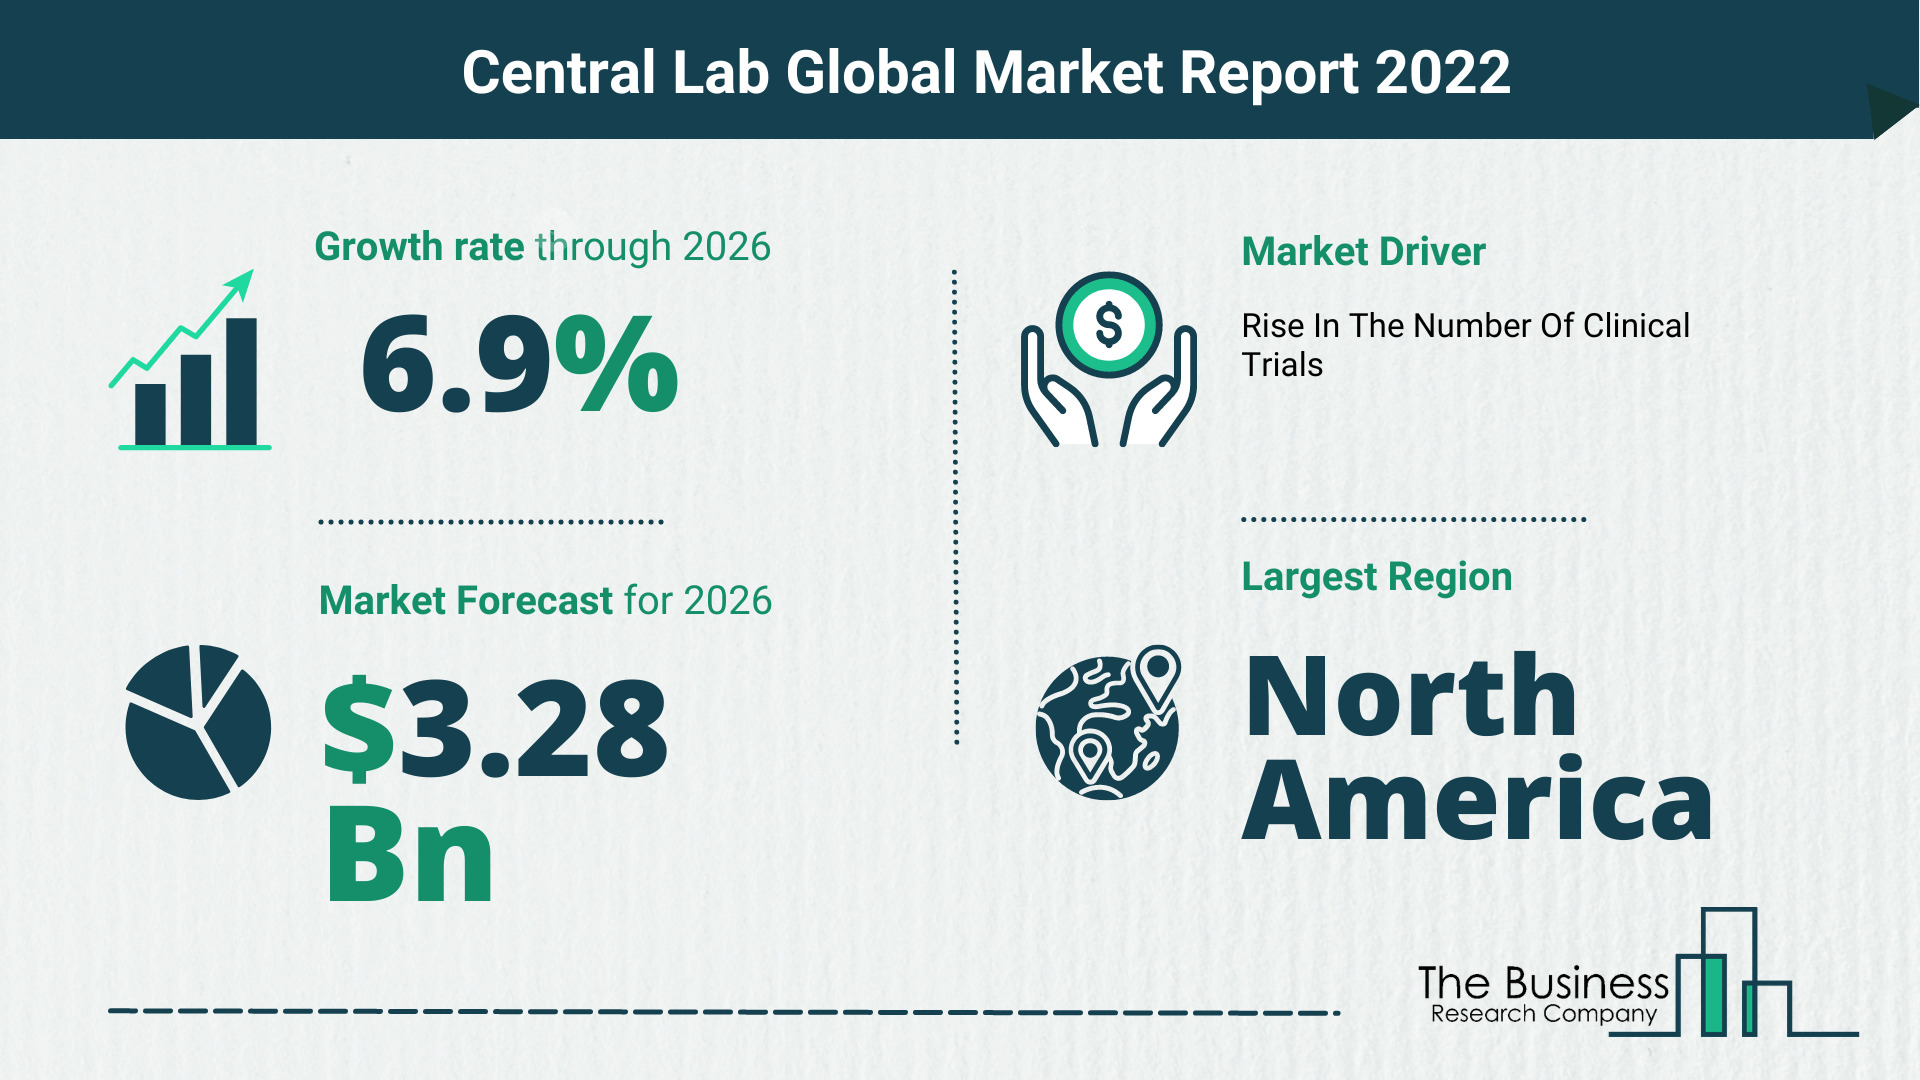 Global Central Lab Market 2022 – Market Opportunities And Strategies